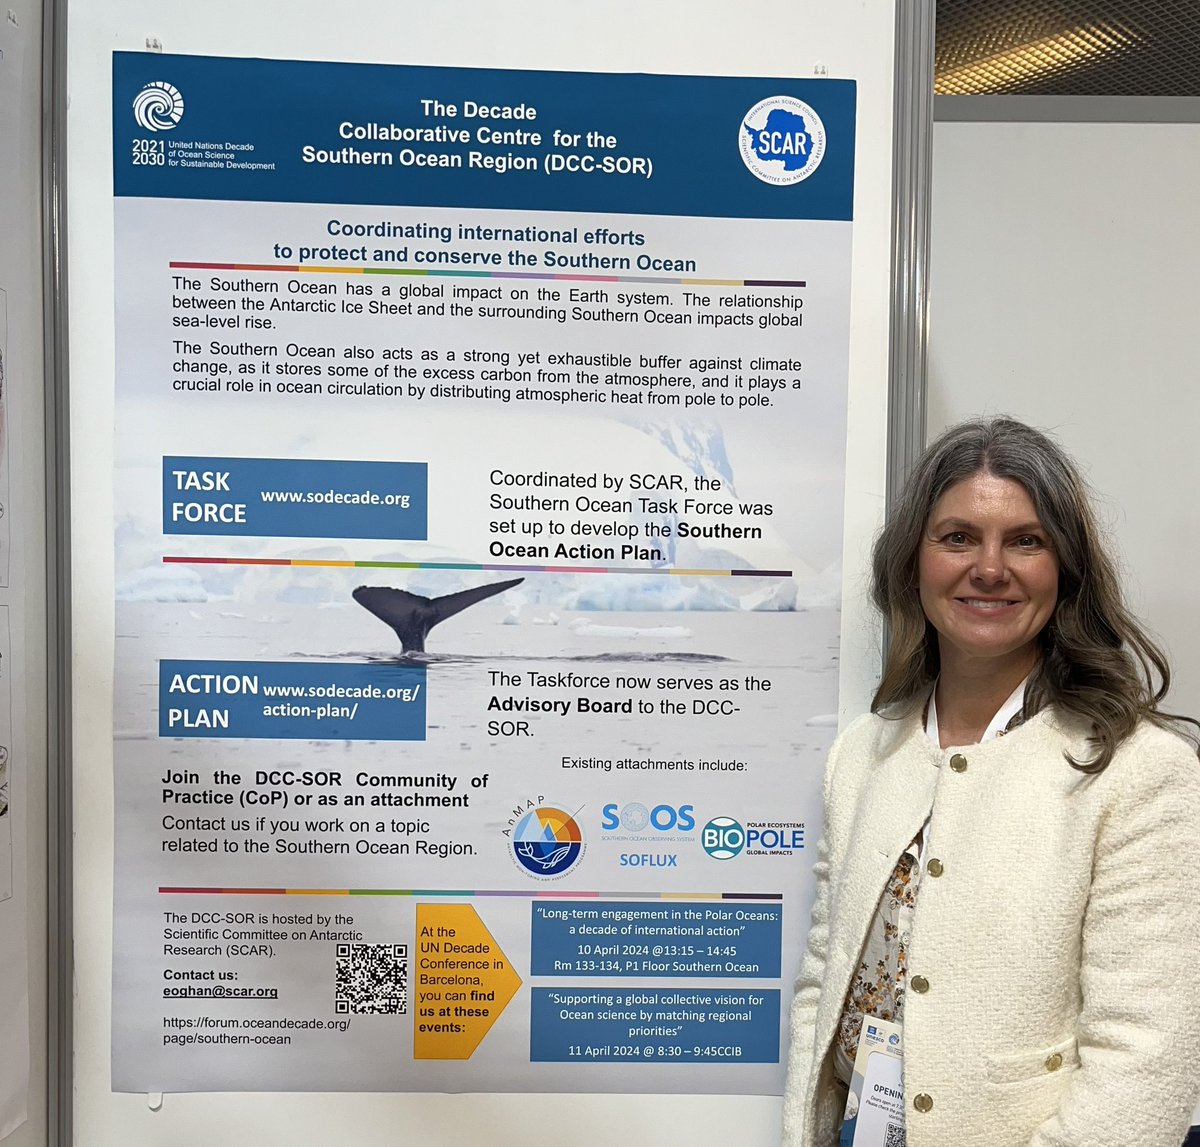 Come and find @ICEDantarctic @BIOPOLE_NERC and @BAS_News ‘s Nadine Johnston at the @SCAR_Tweets poster on the UN Decade Collaborative Centre for the Southern Ocean, featuring the @UNOceanDecade BIOPOLE Project at #oceandecade24